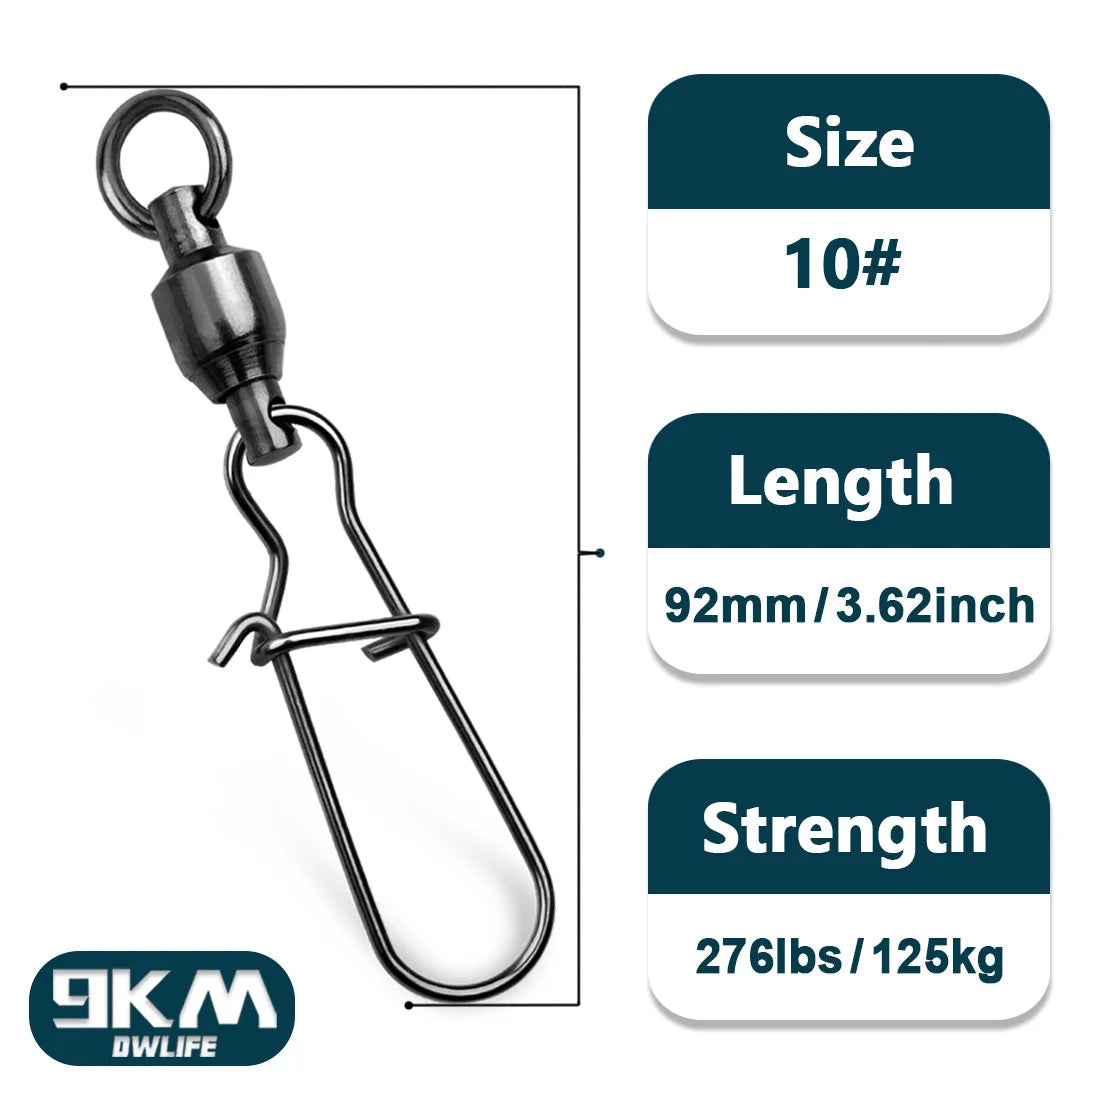 Fishing Snap Swivels Duo Lock Ball Bearing Swivel Snap Stainless Steel Fishing Accessories Fast Snap Clip Fishing Lure Connector